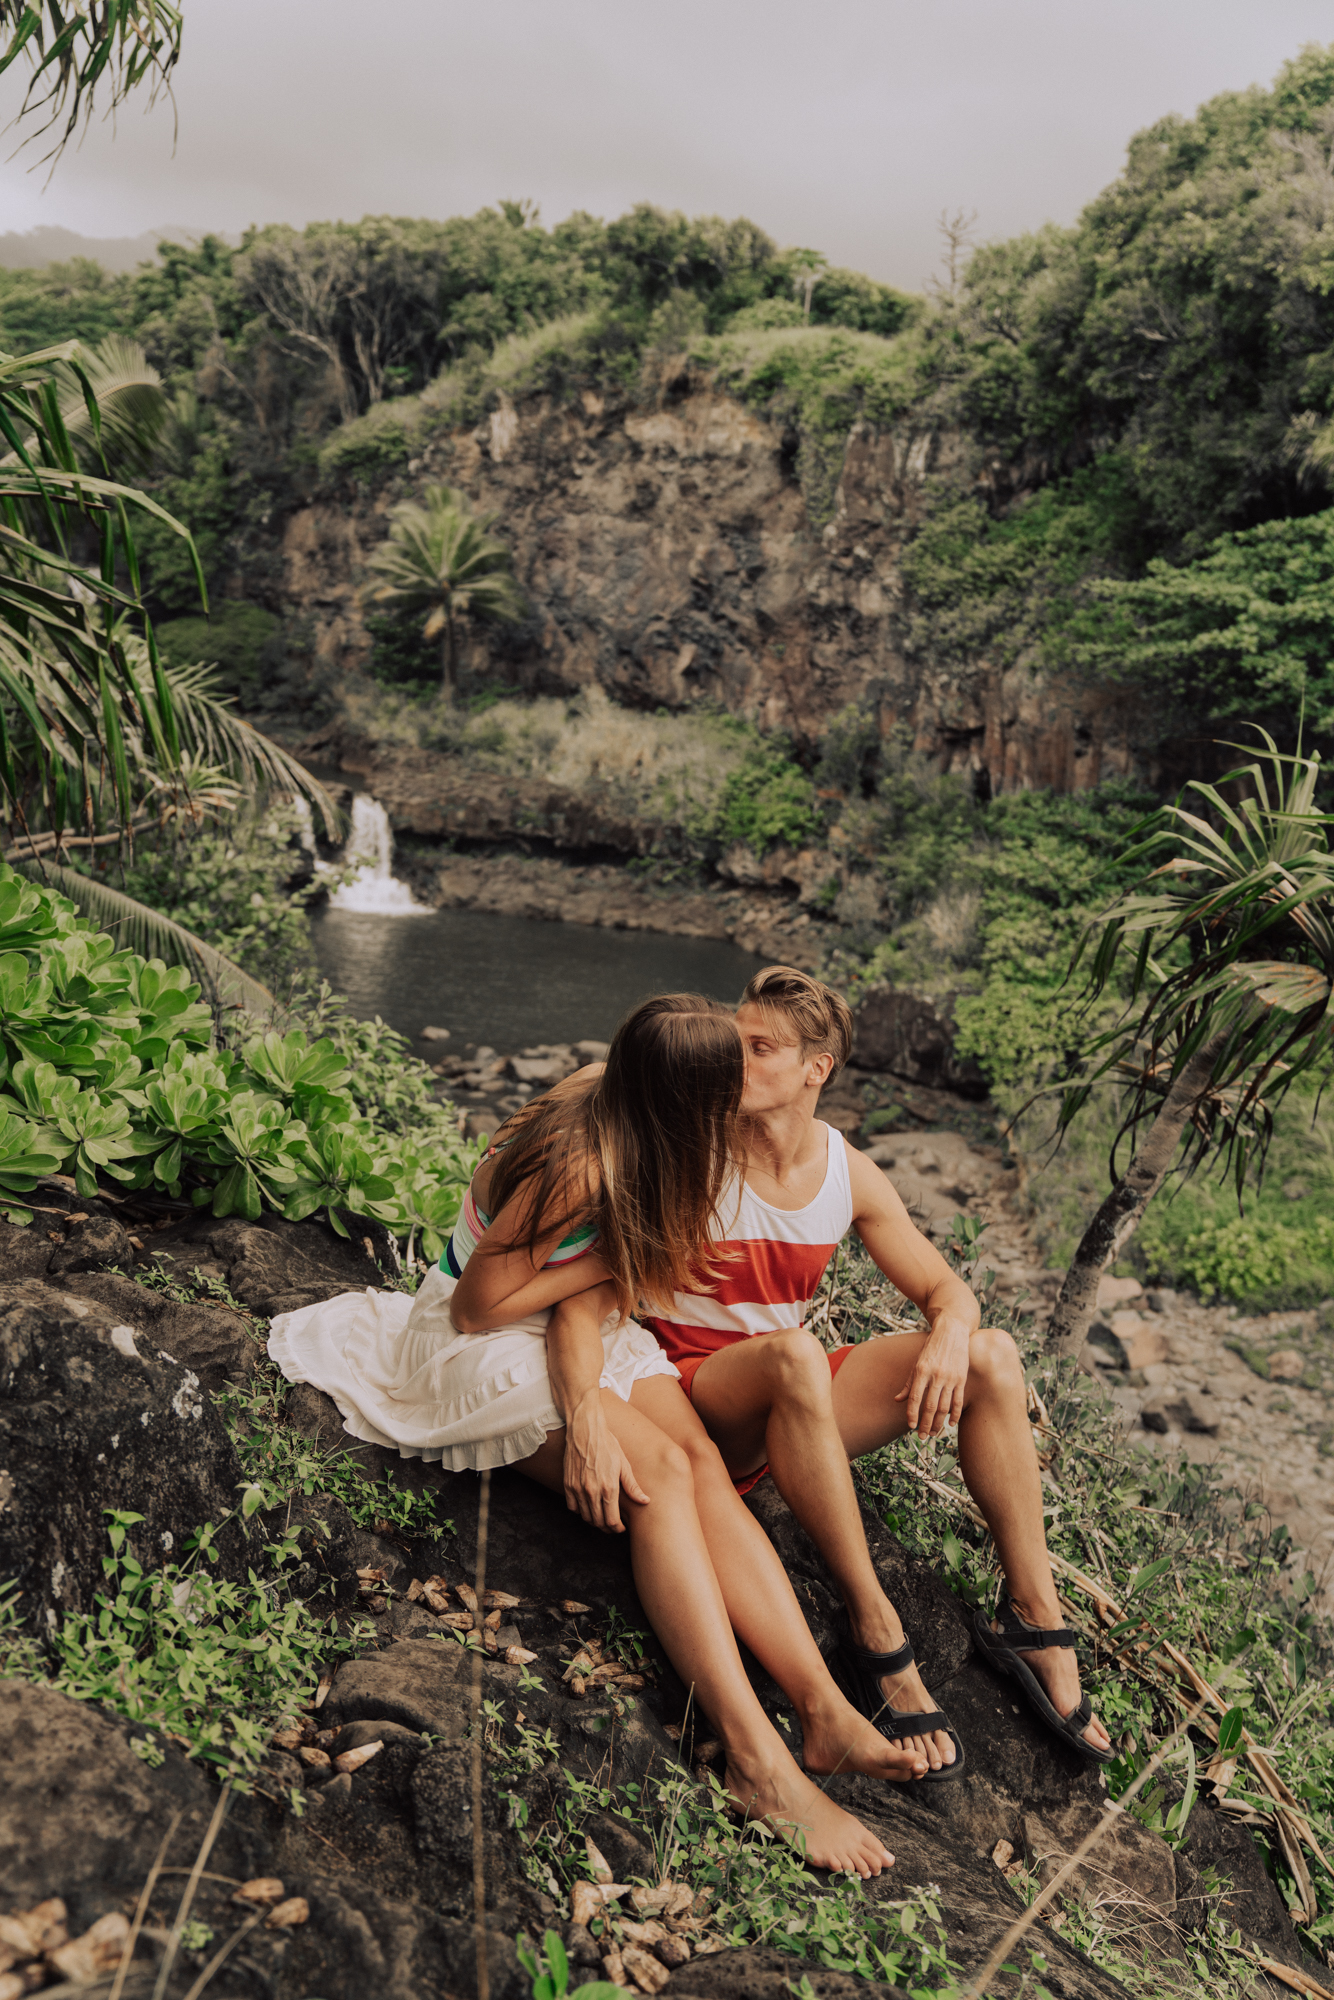 man and women kissing with a waterfall and palm trees in the background.